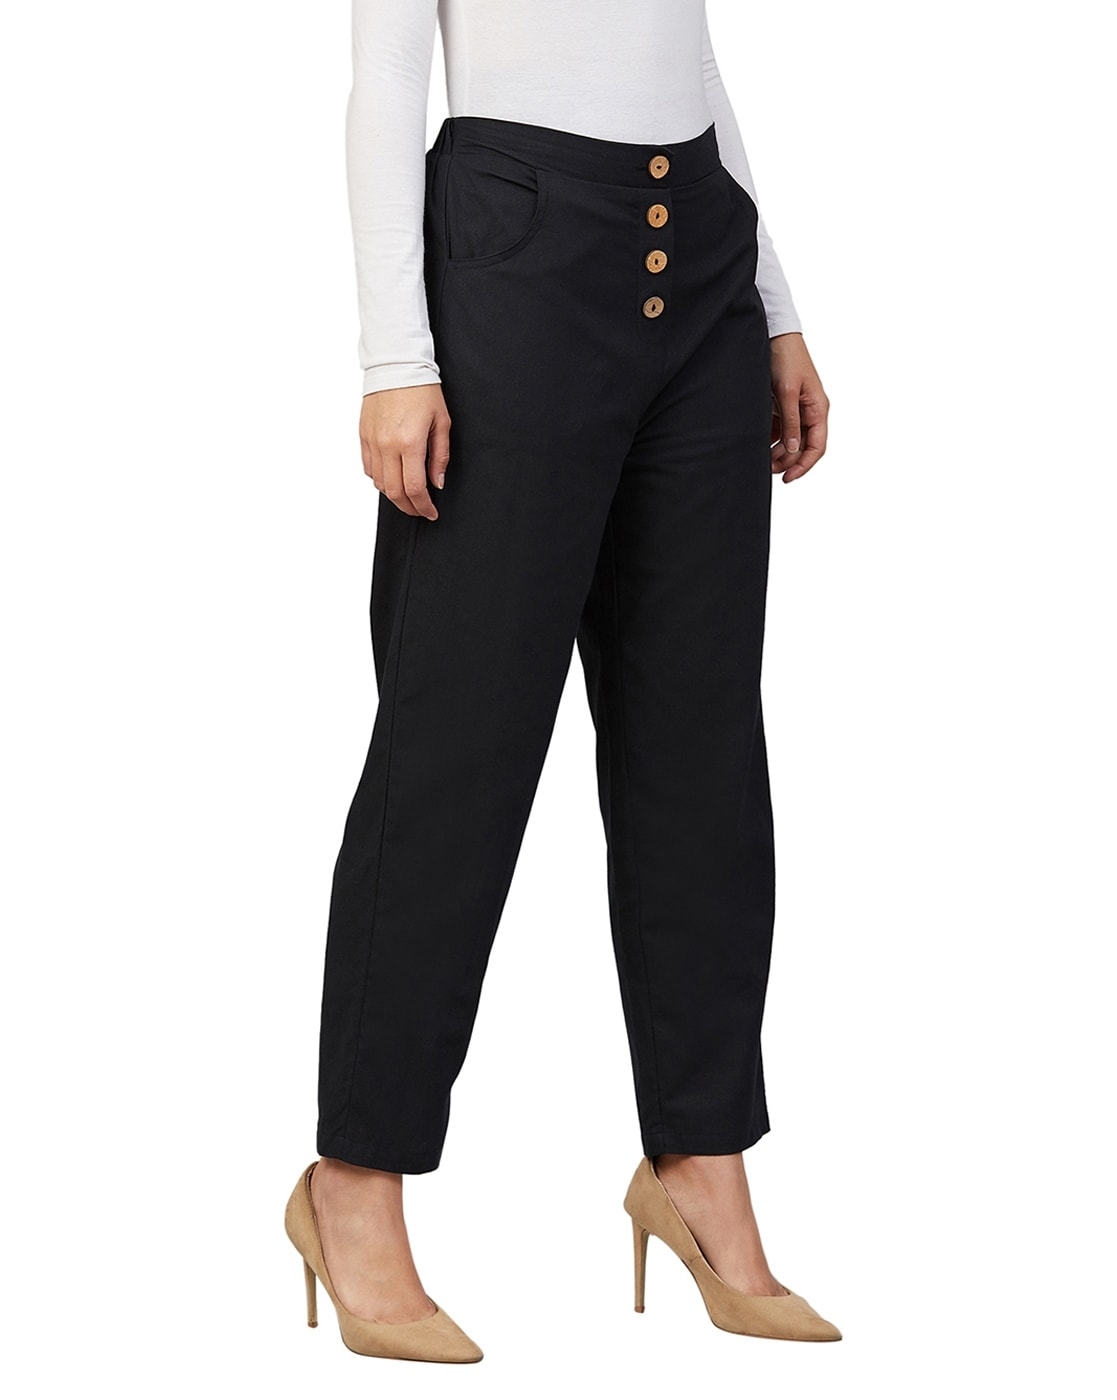 XXL only  high waist navy wool trousers with button fly and brace buttons   Elgar Shirts